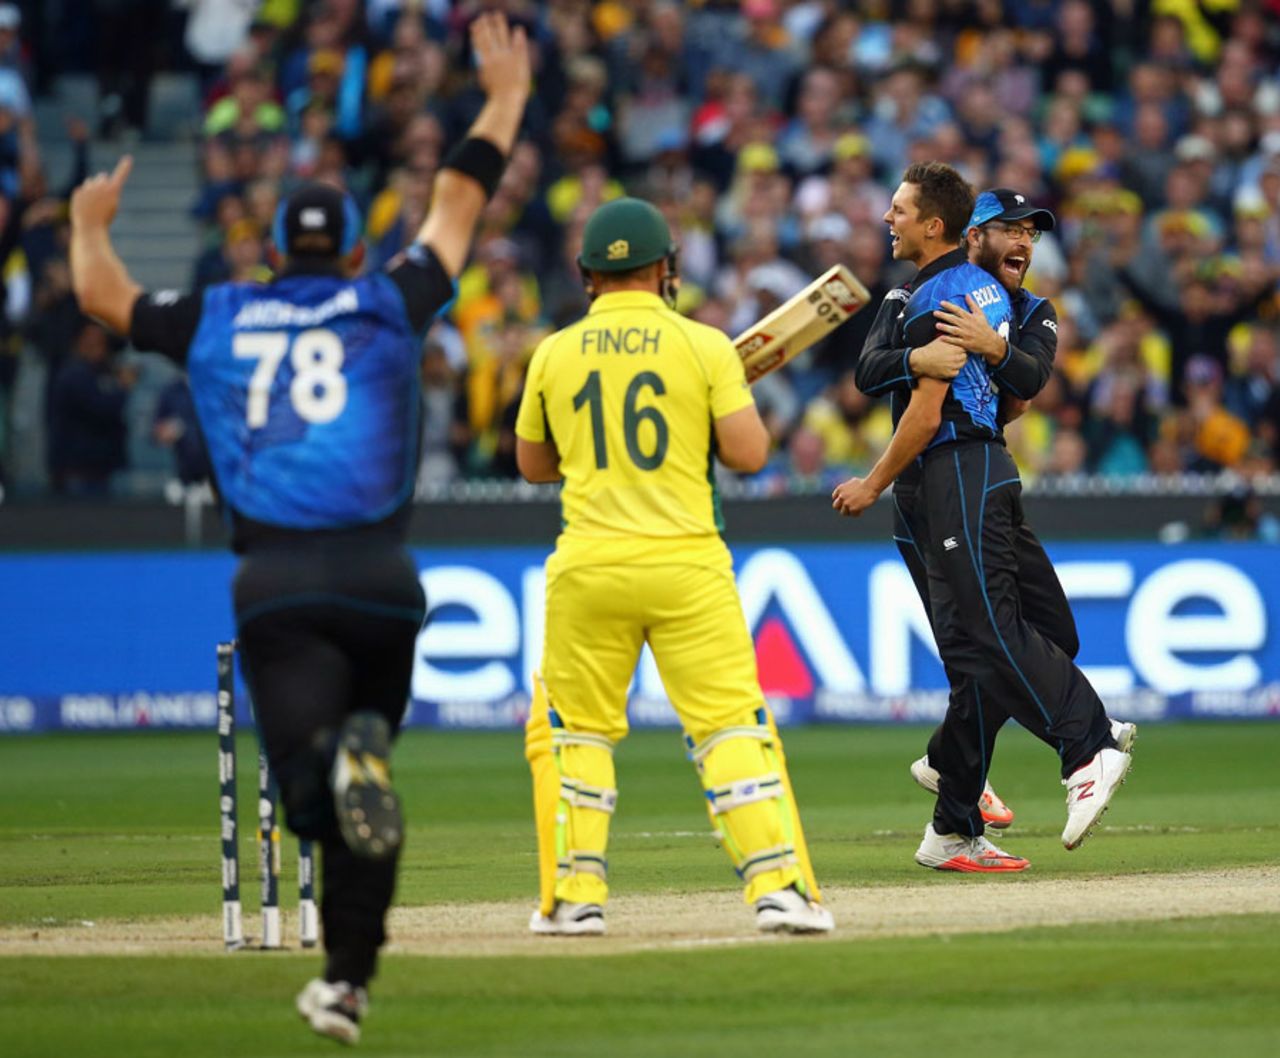 Trent Boult celebrates after dismissing Aaron Finch for a duck, Australia v New Zealand, World Cup 2015, final, Melbourne, March 29, 2015